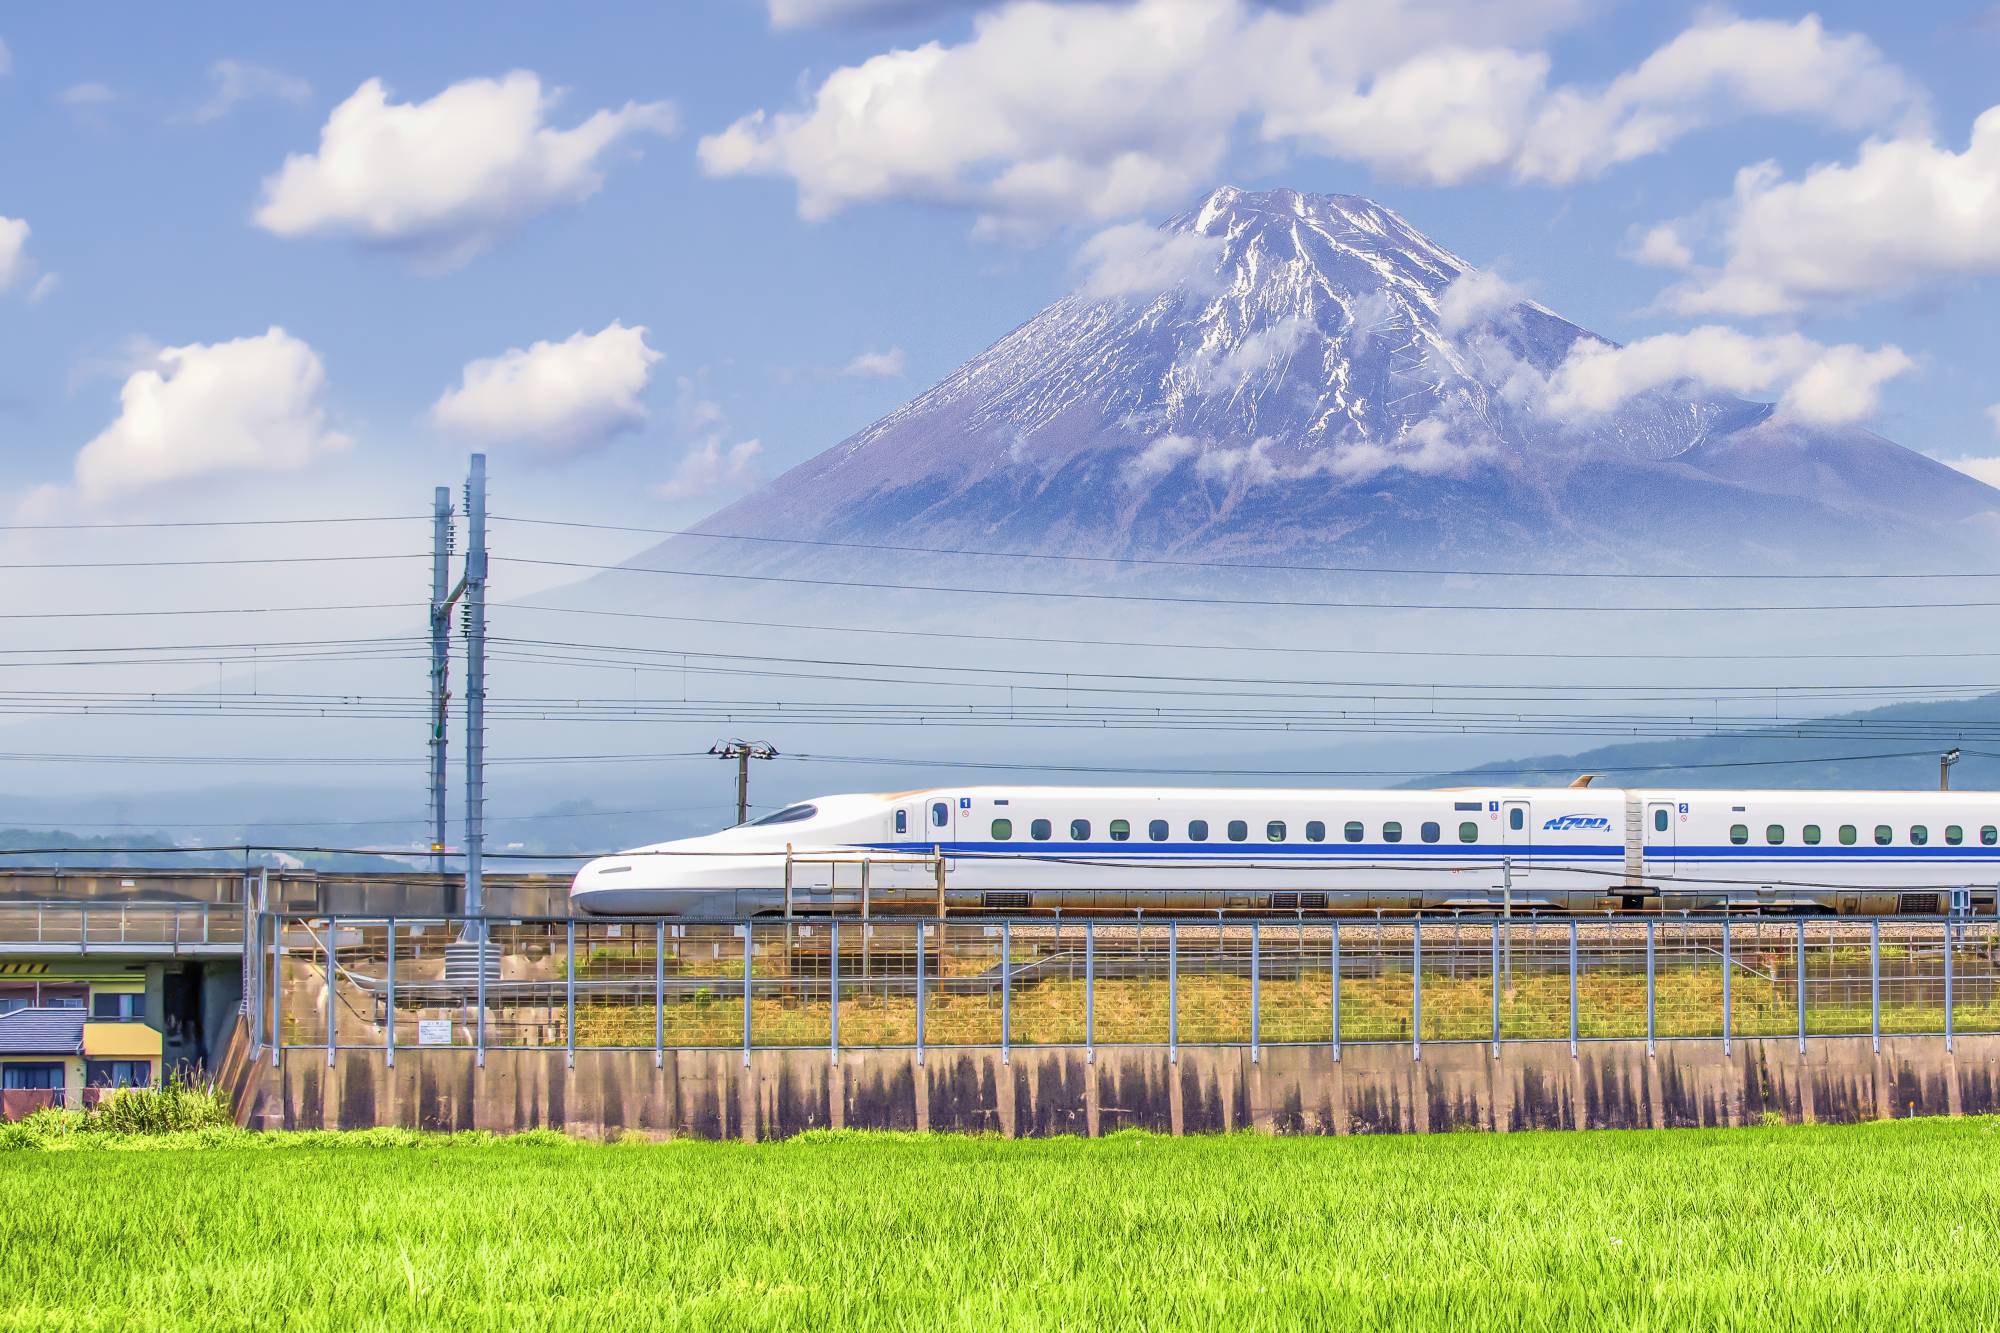 The Tokaido Shinkansen paved the way for subsequent bullet trains across Honshu, Kyushu and Hokkaido. | GETTY IMAGES